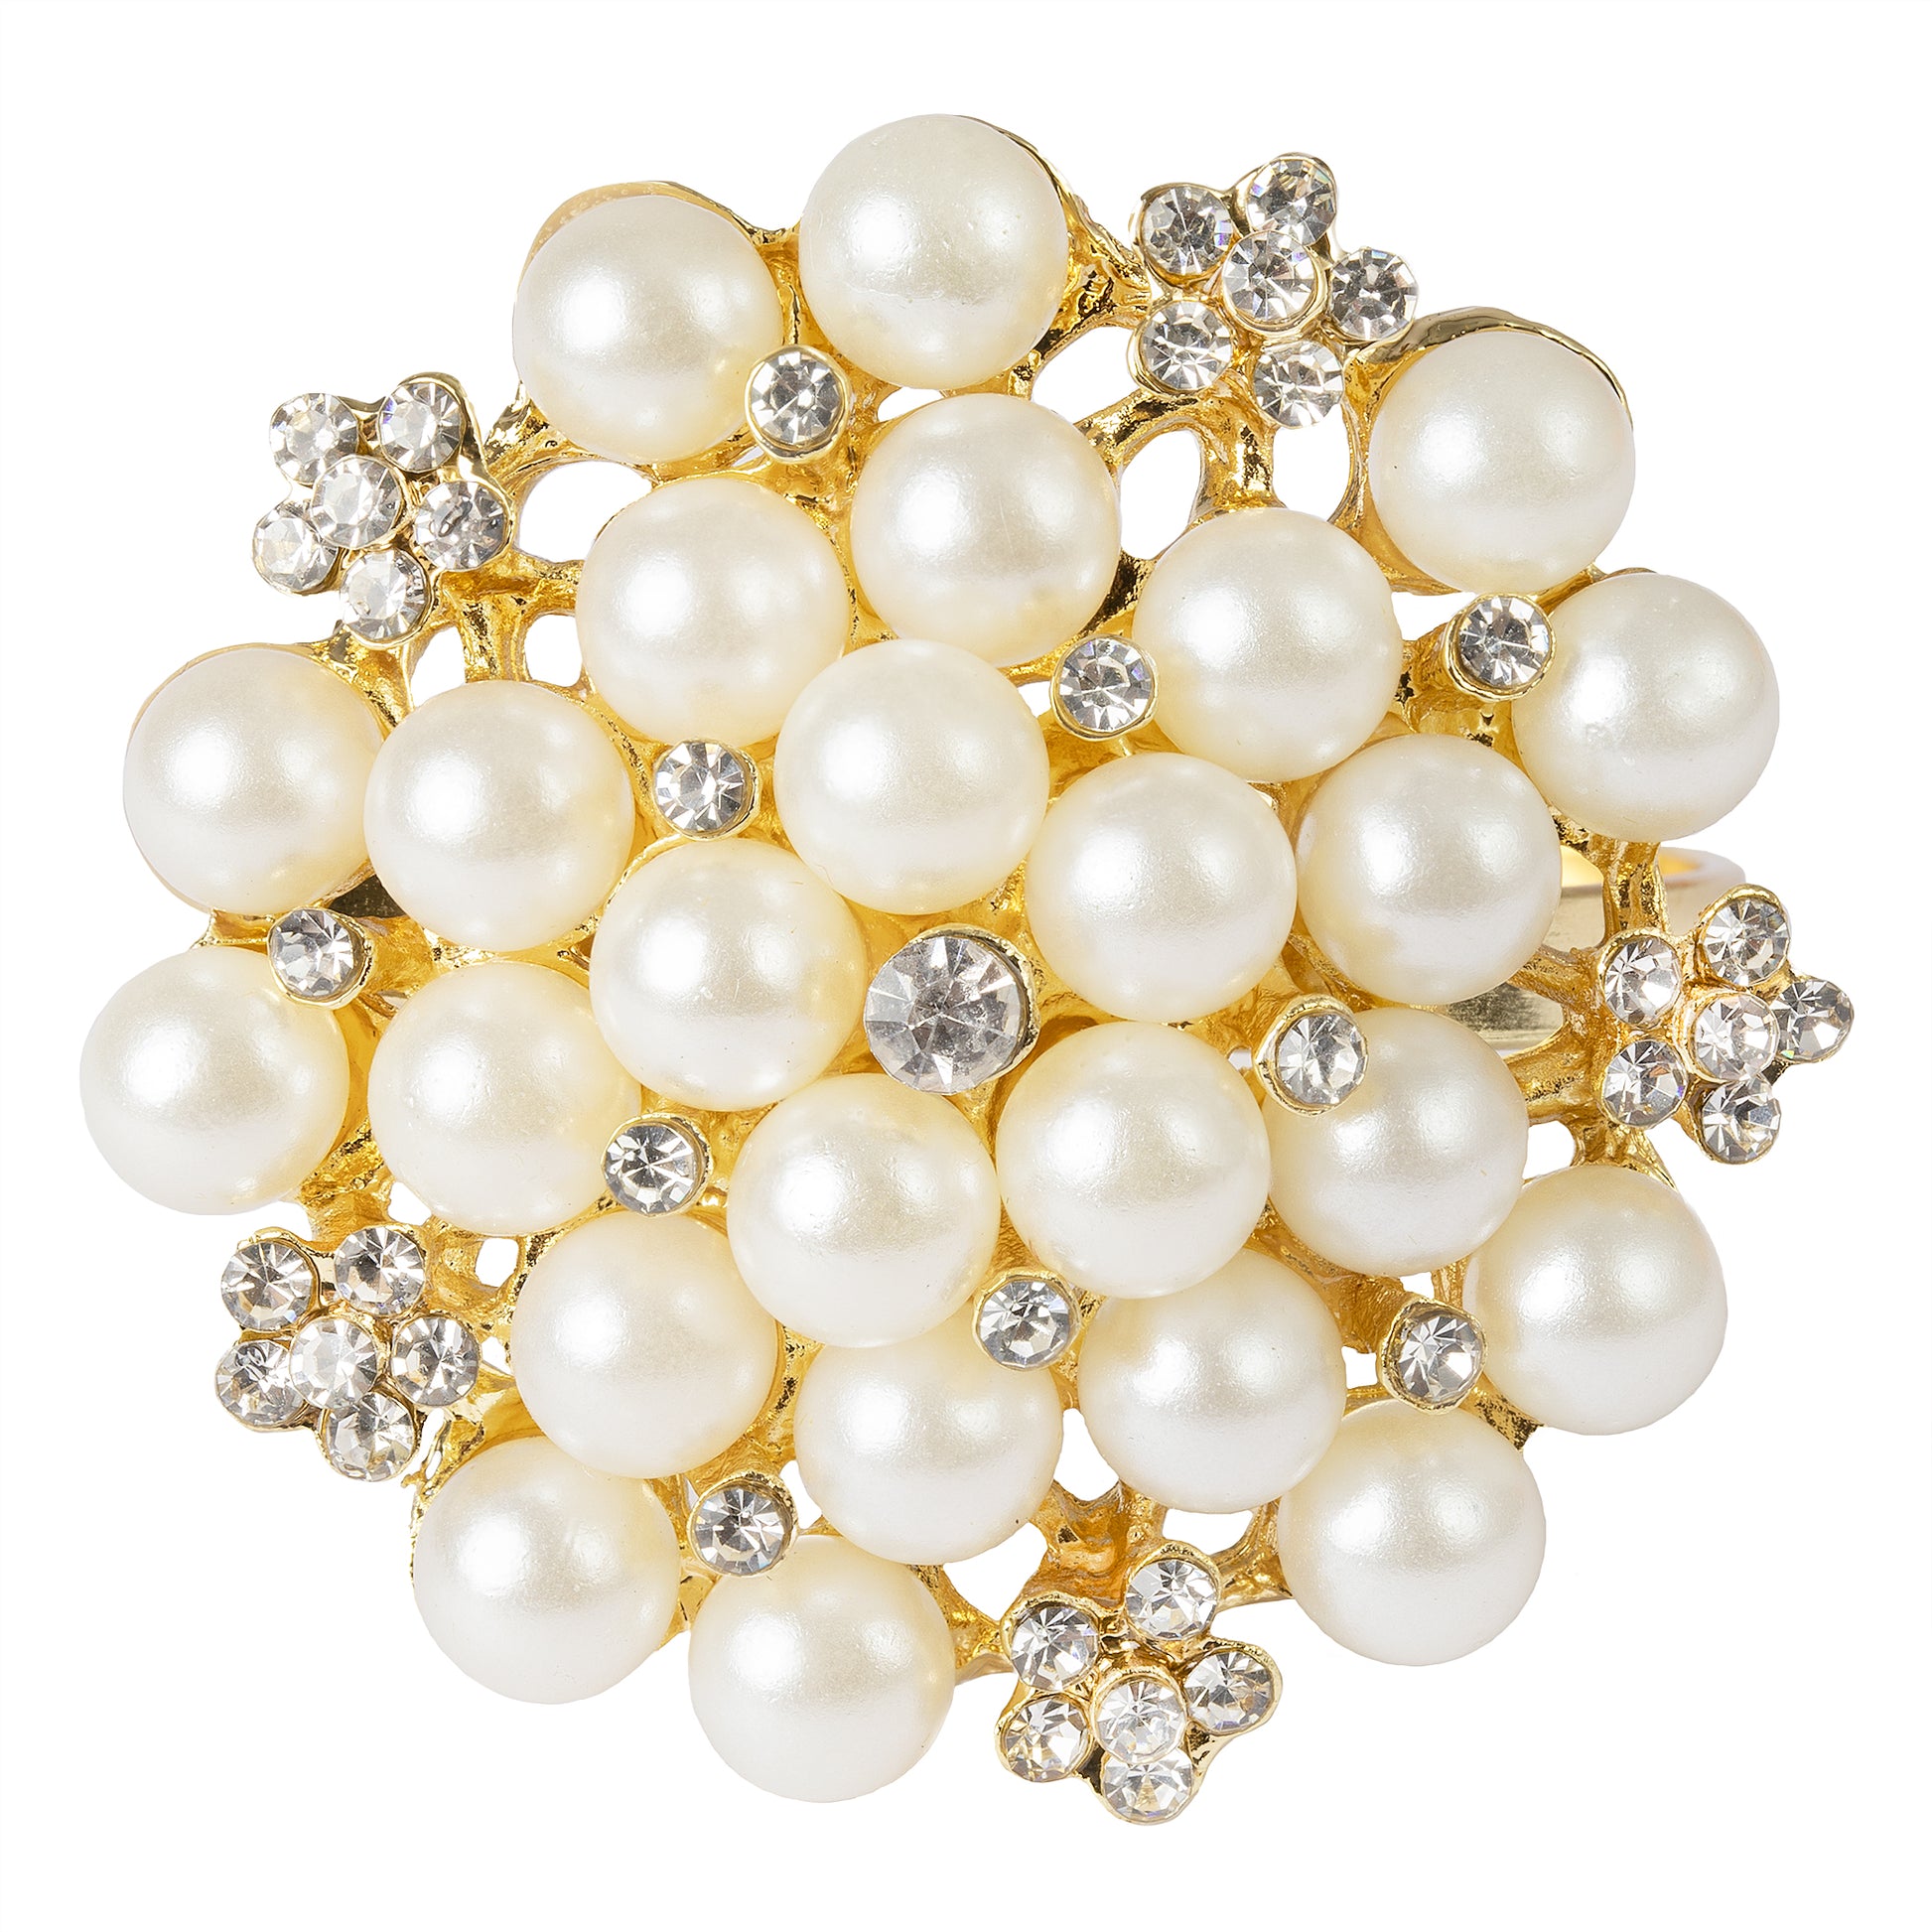 10 pc/pk Pearl and Diamond Cluster Napkin Ring - Gold